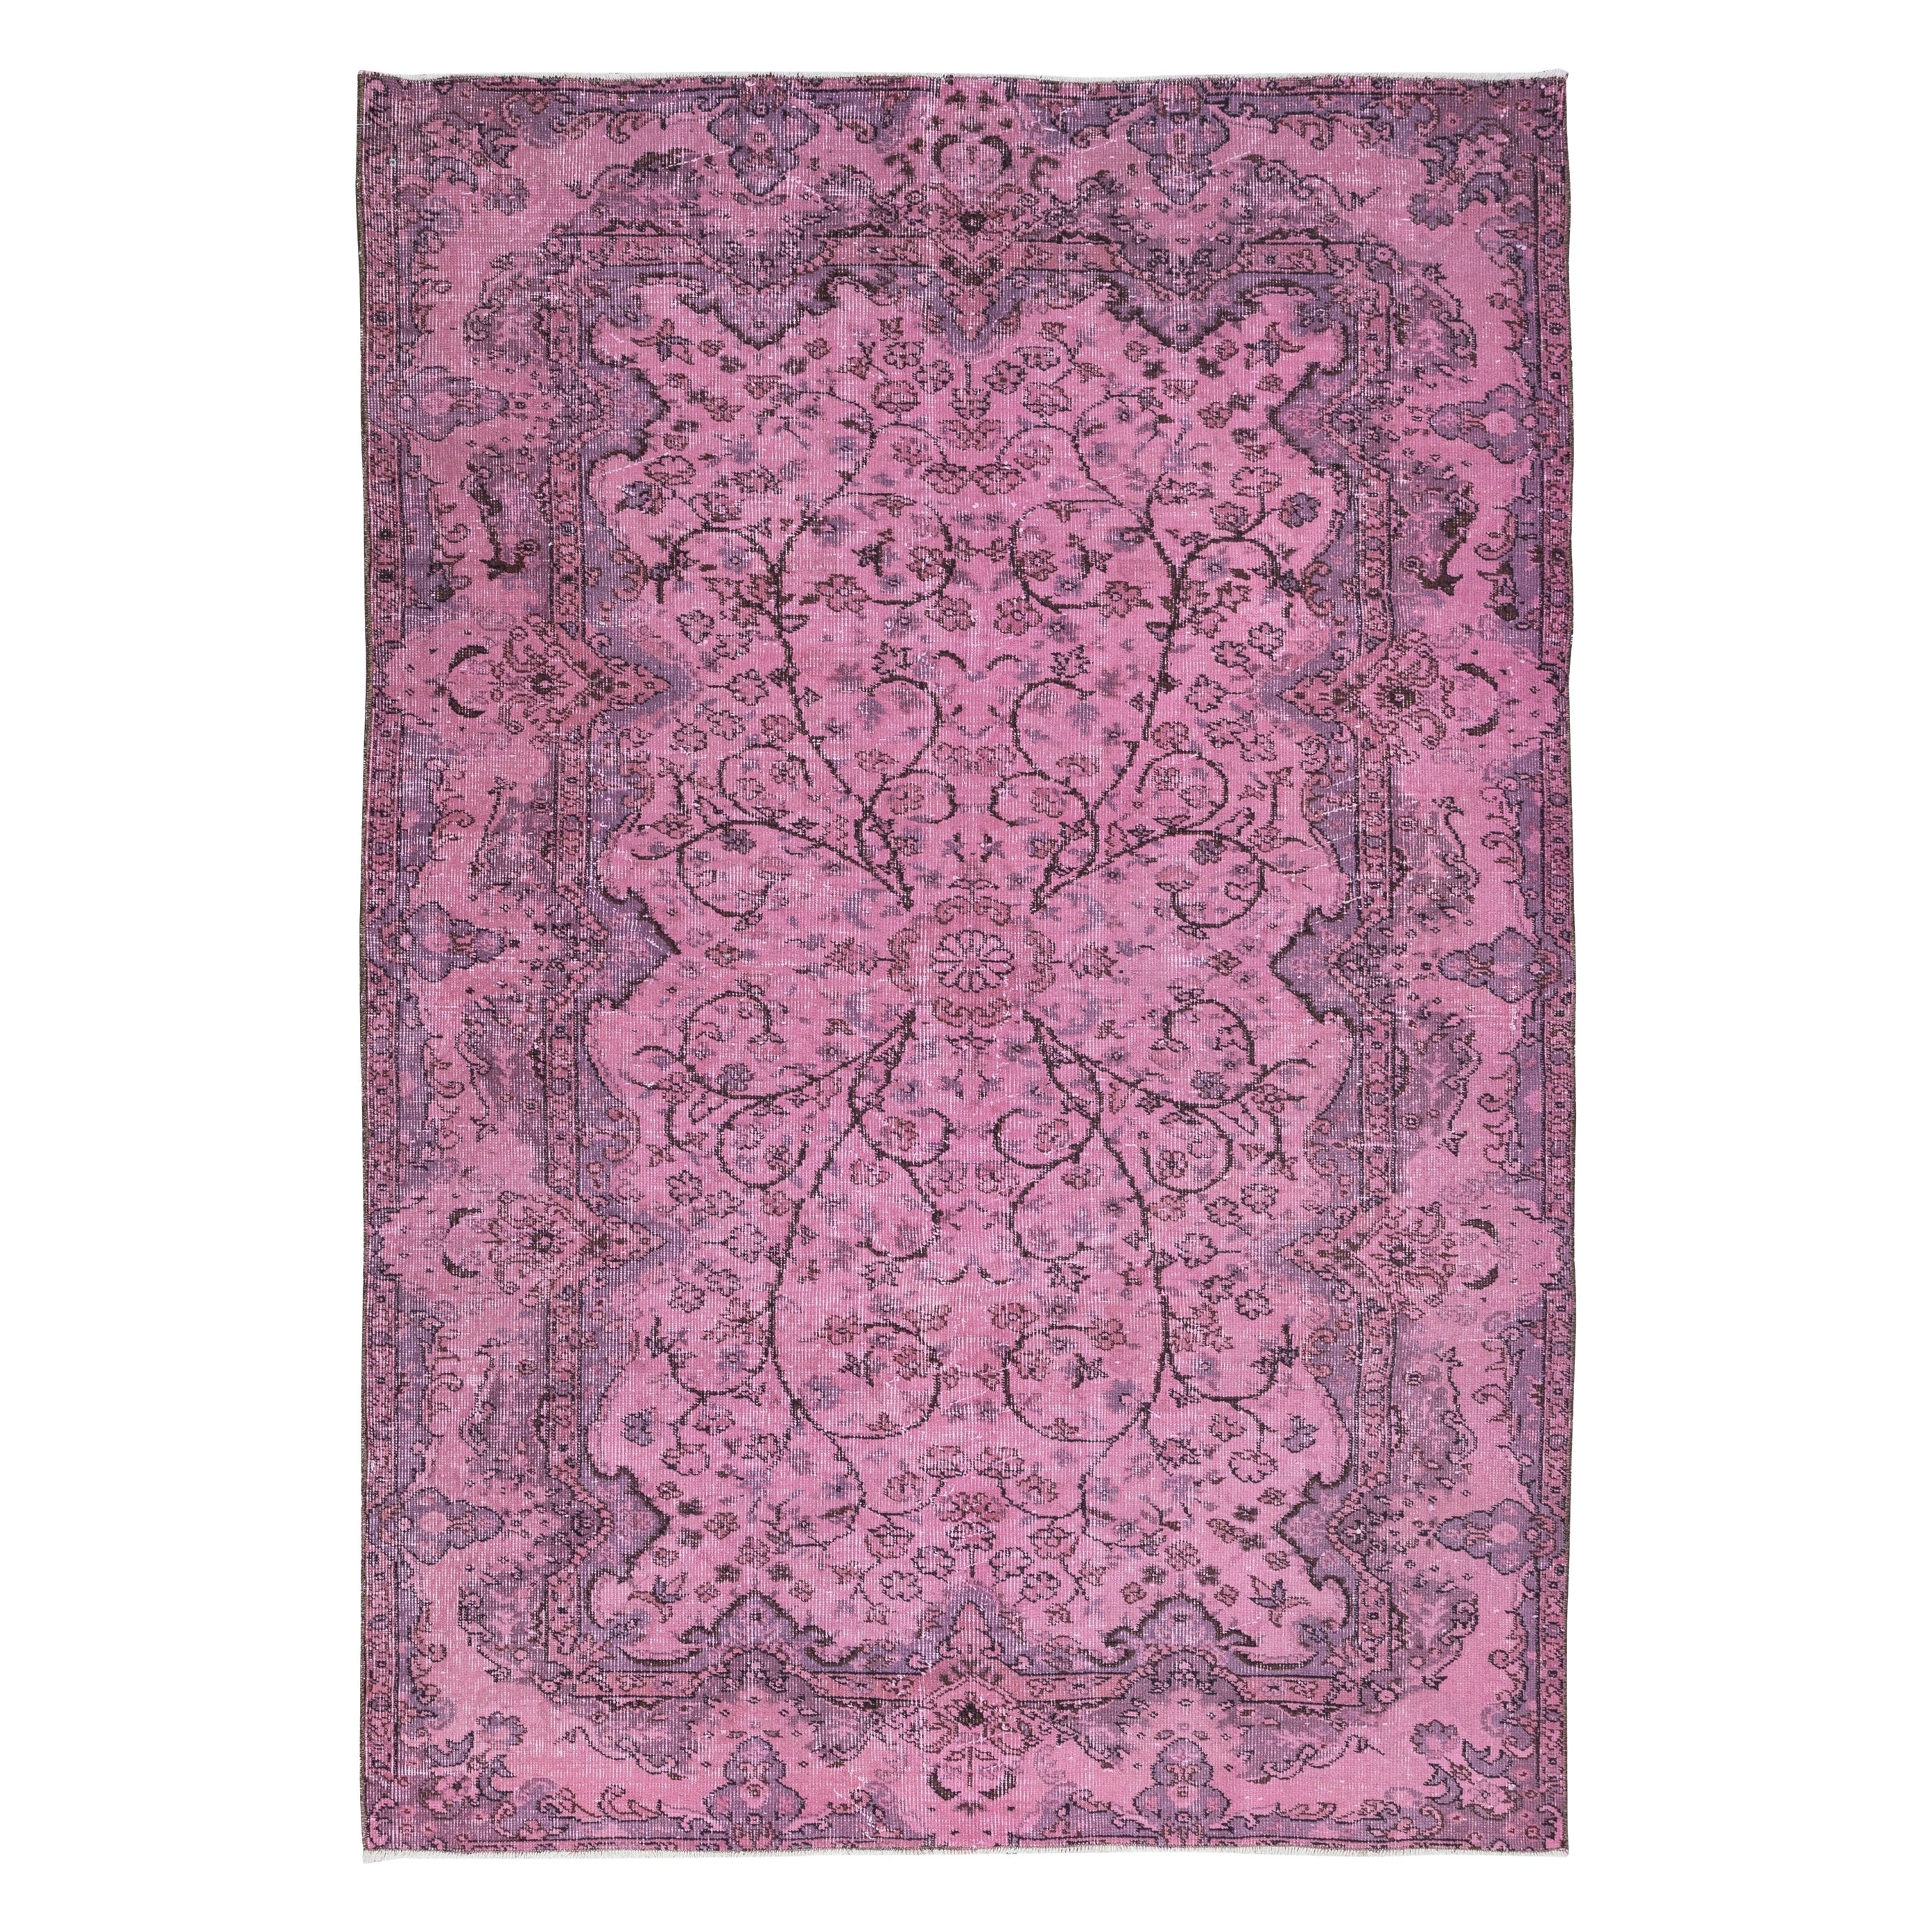 5.4x7.7 Ft Magnificent Handmade Pink Rug, Contemporary Turkish Wool Carpet For Sale